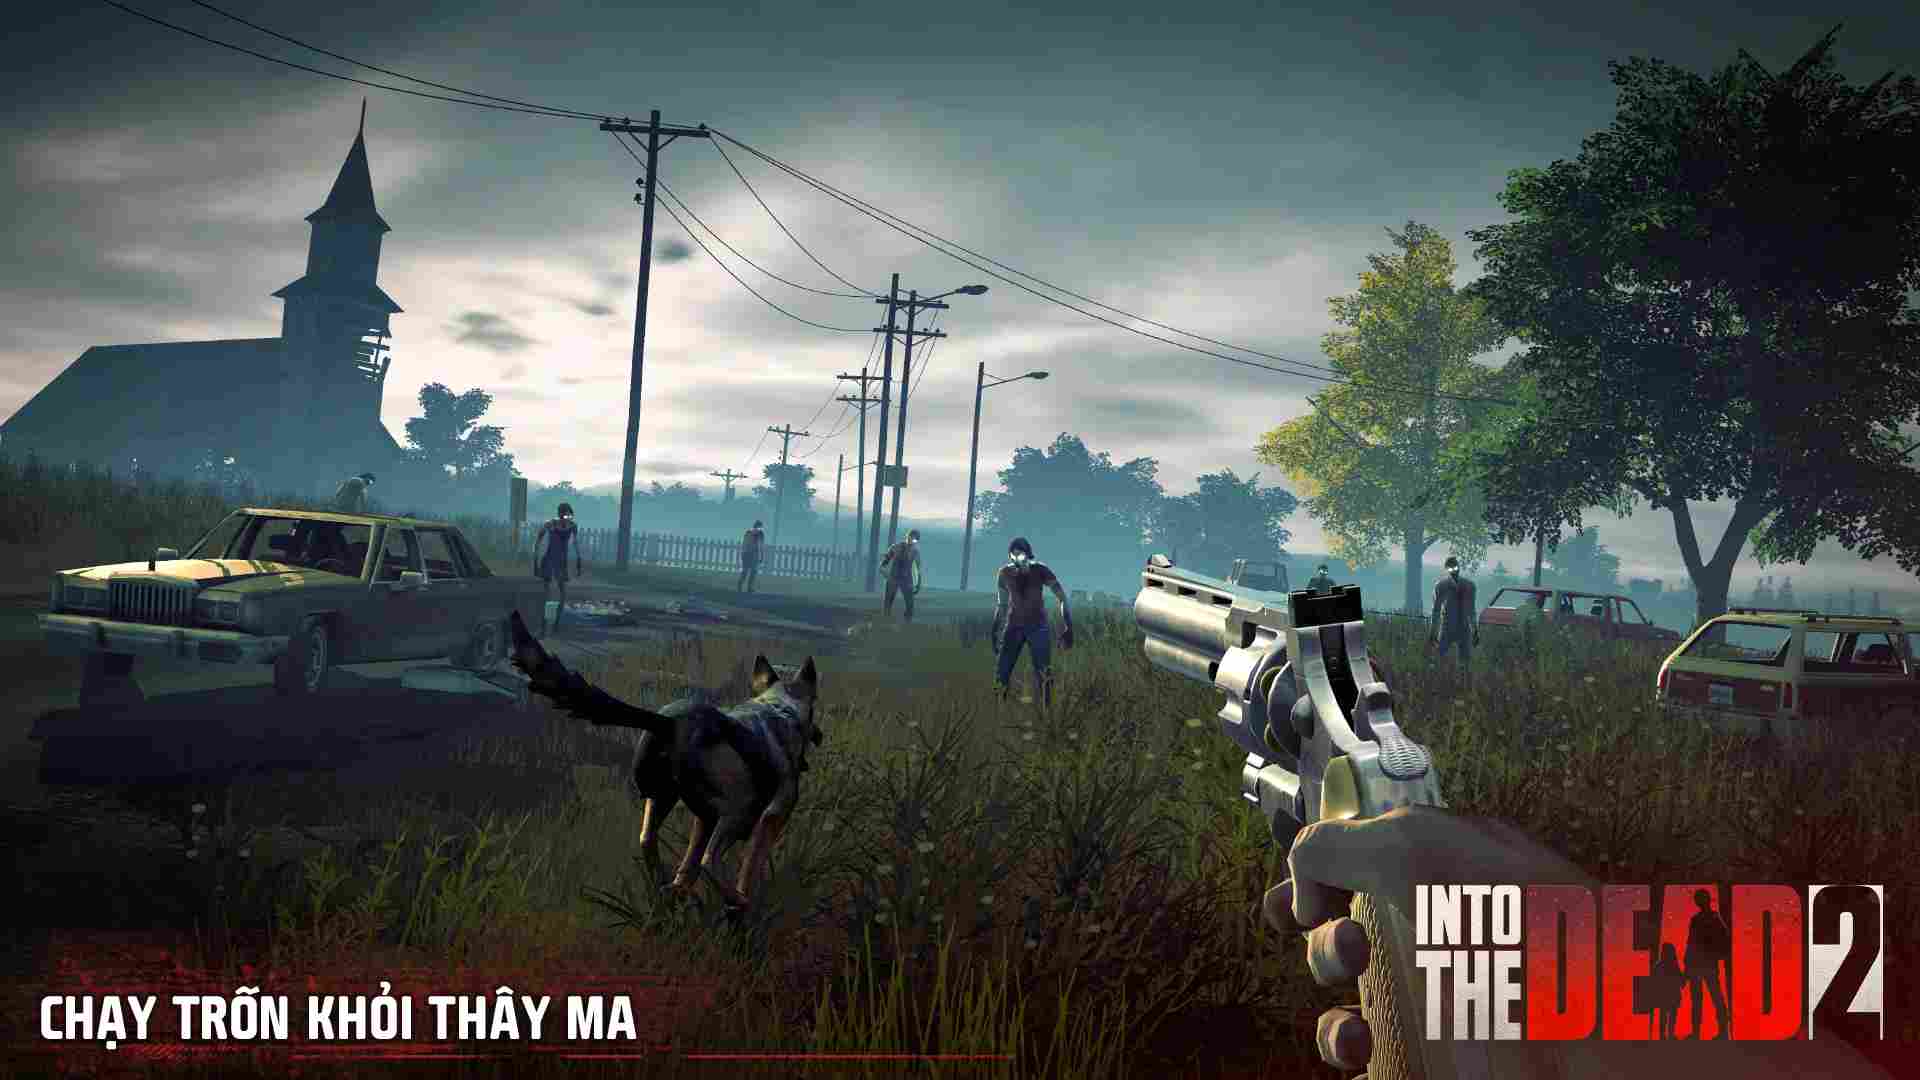 Into The Dead 2 1.70.1 APK MOD [Menu LMH, Huge Amount Of ammo money, All weapons unlocked]